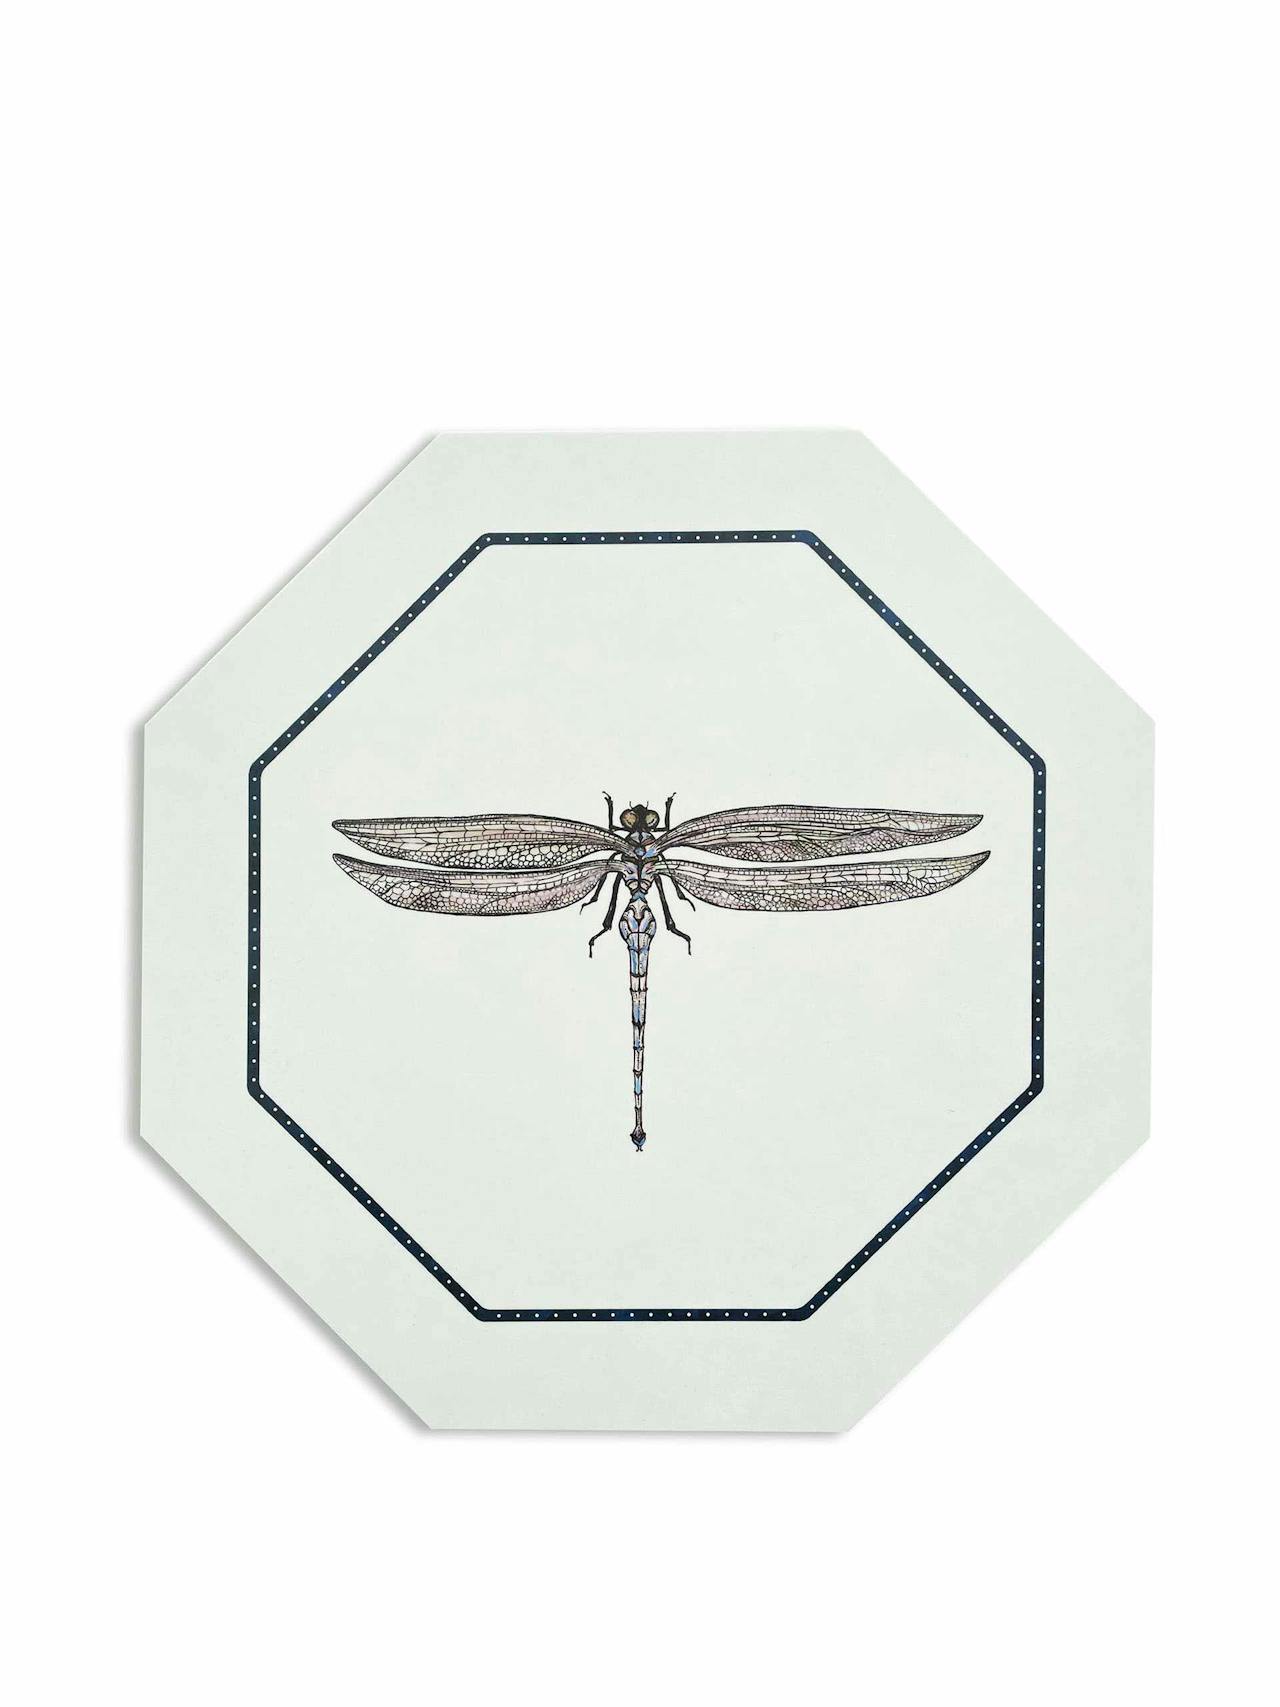 Hexagon dragon fly placemat